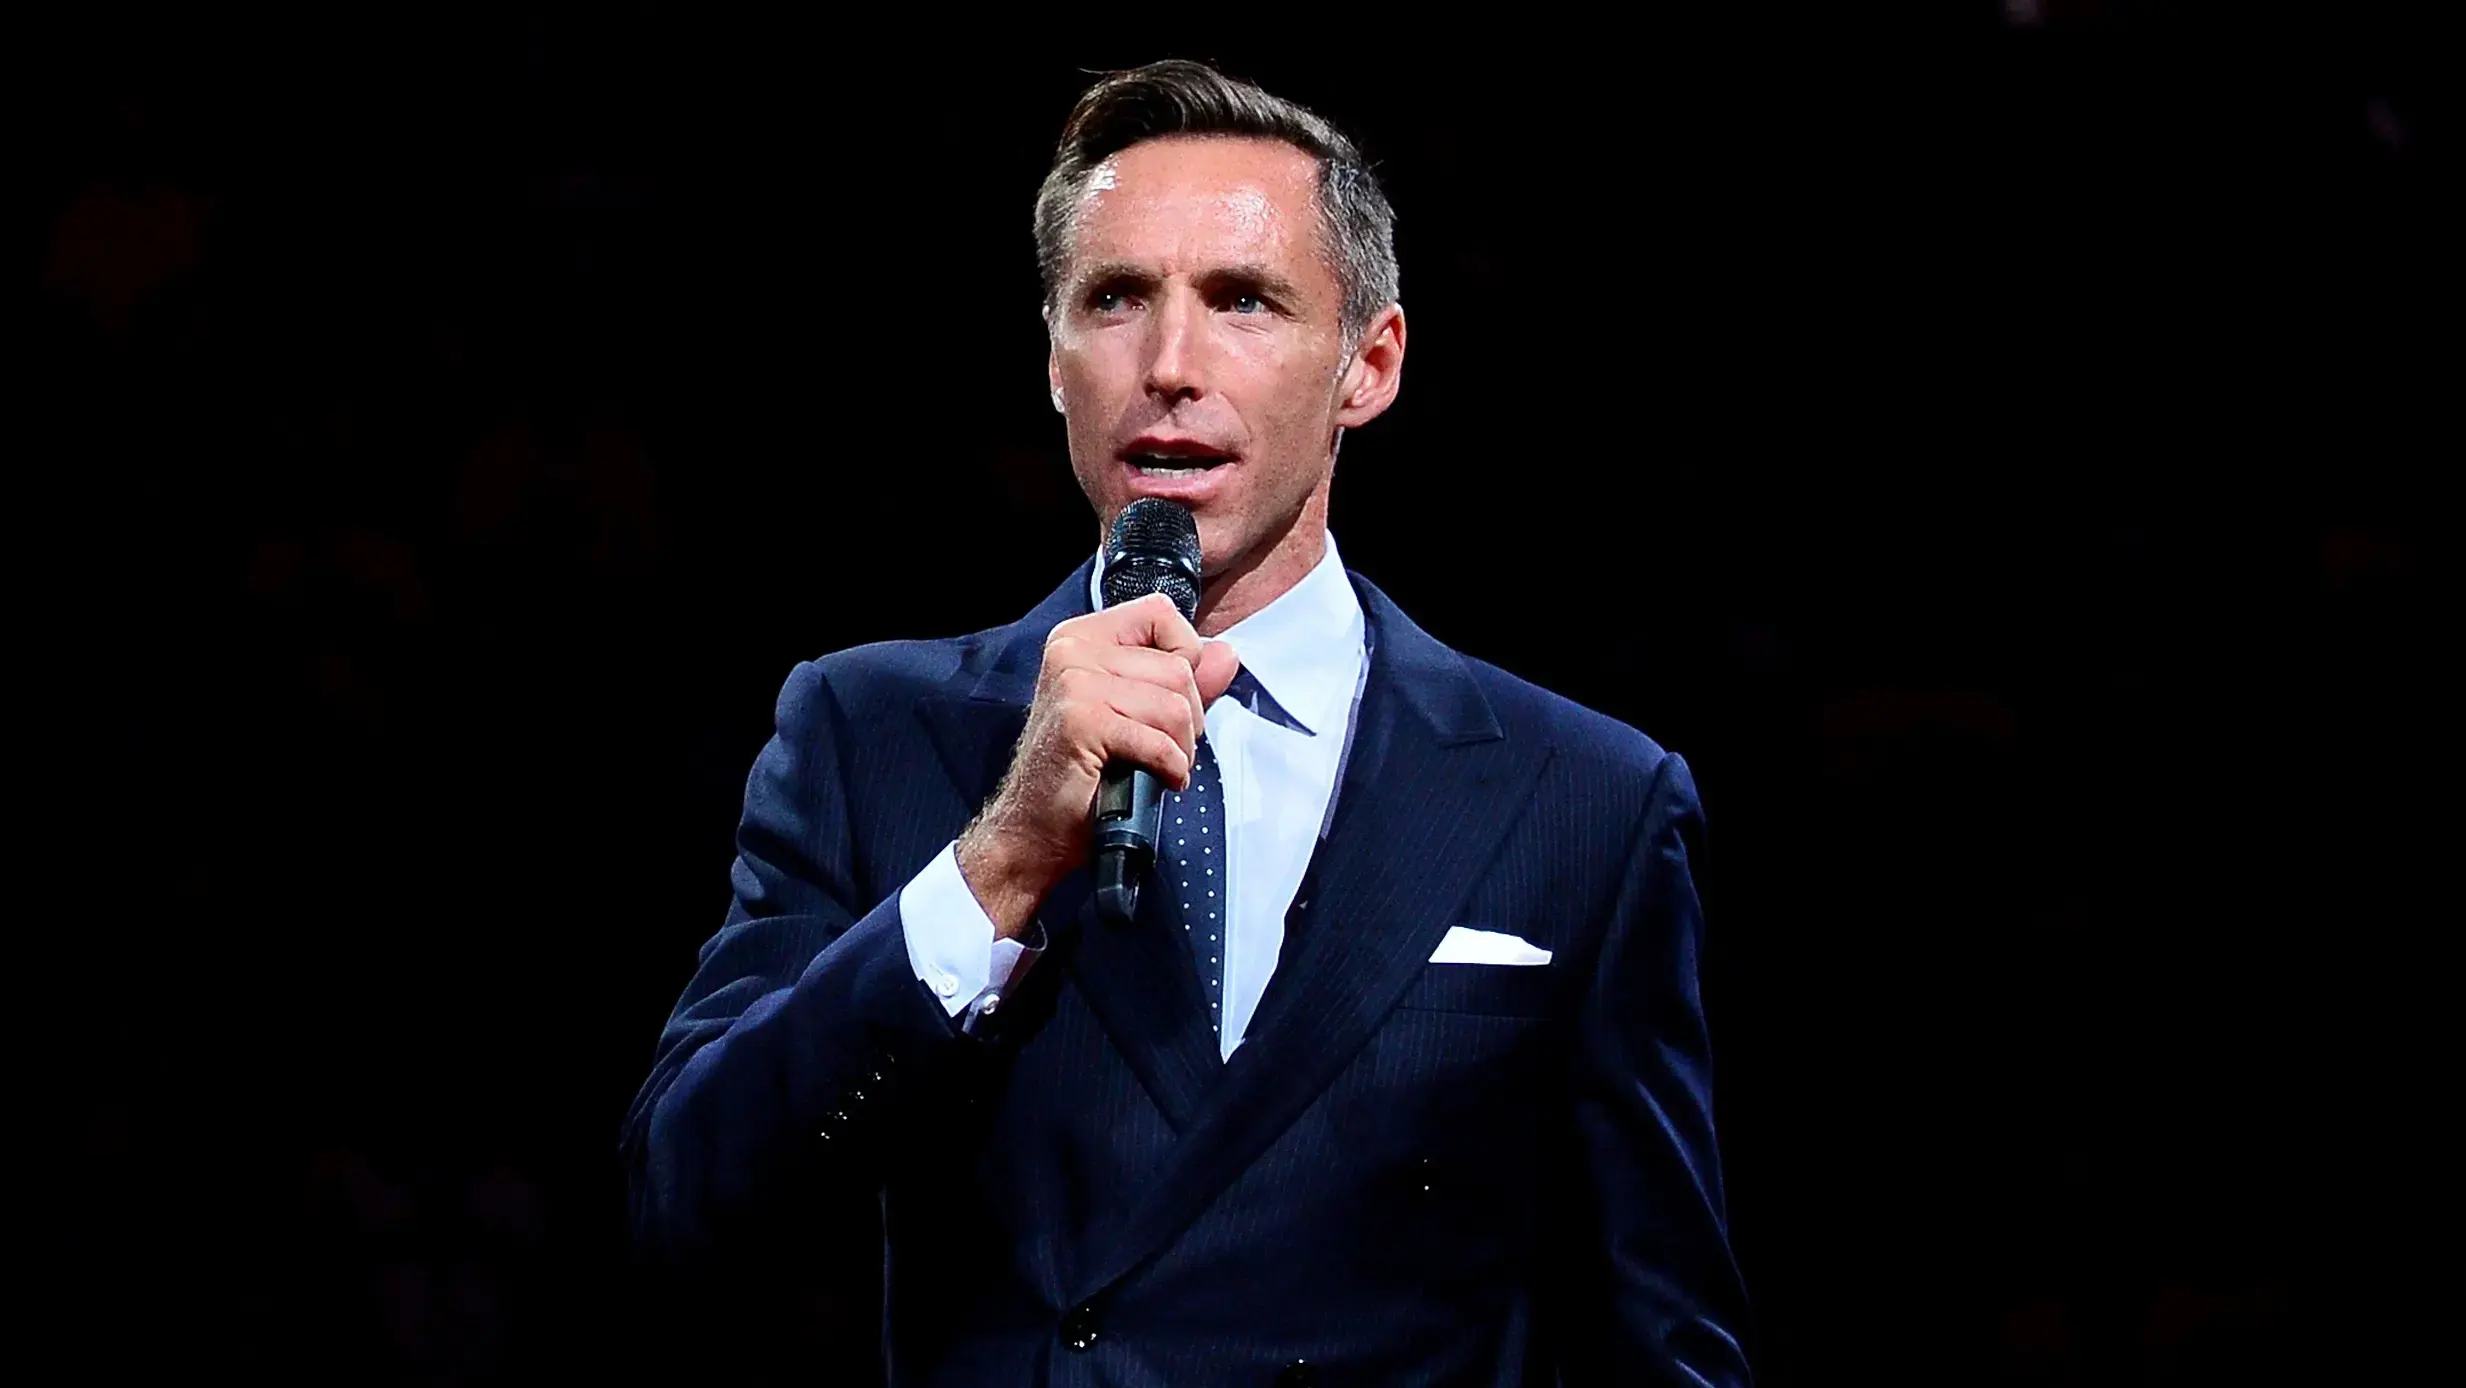 Oct 30, 2015; Phoenix, AZ, USA; Two-time NBA Most Valuable Player Steve Nash during his induction into the Suns Ring of Honor speech during half time at Talking Stick Resort Arena. / Jennifer Stewart/USA TODAY Sports